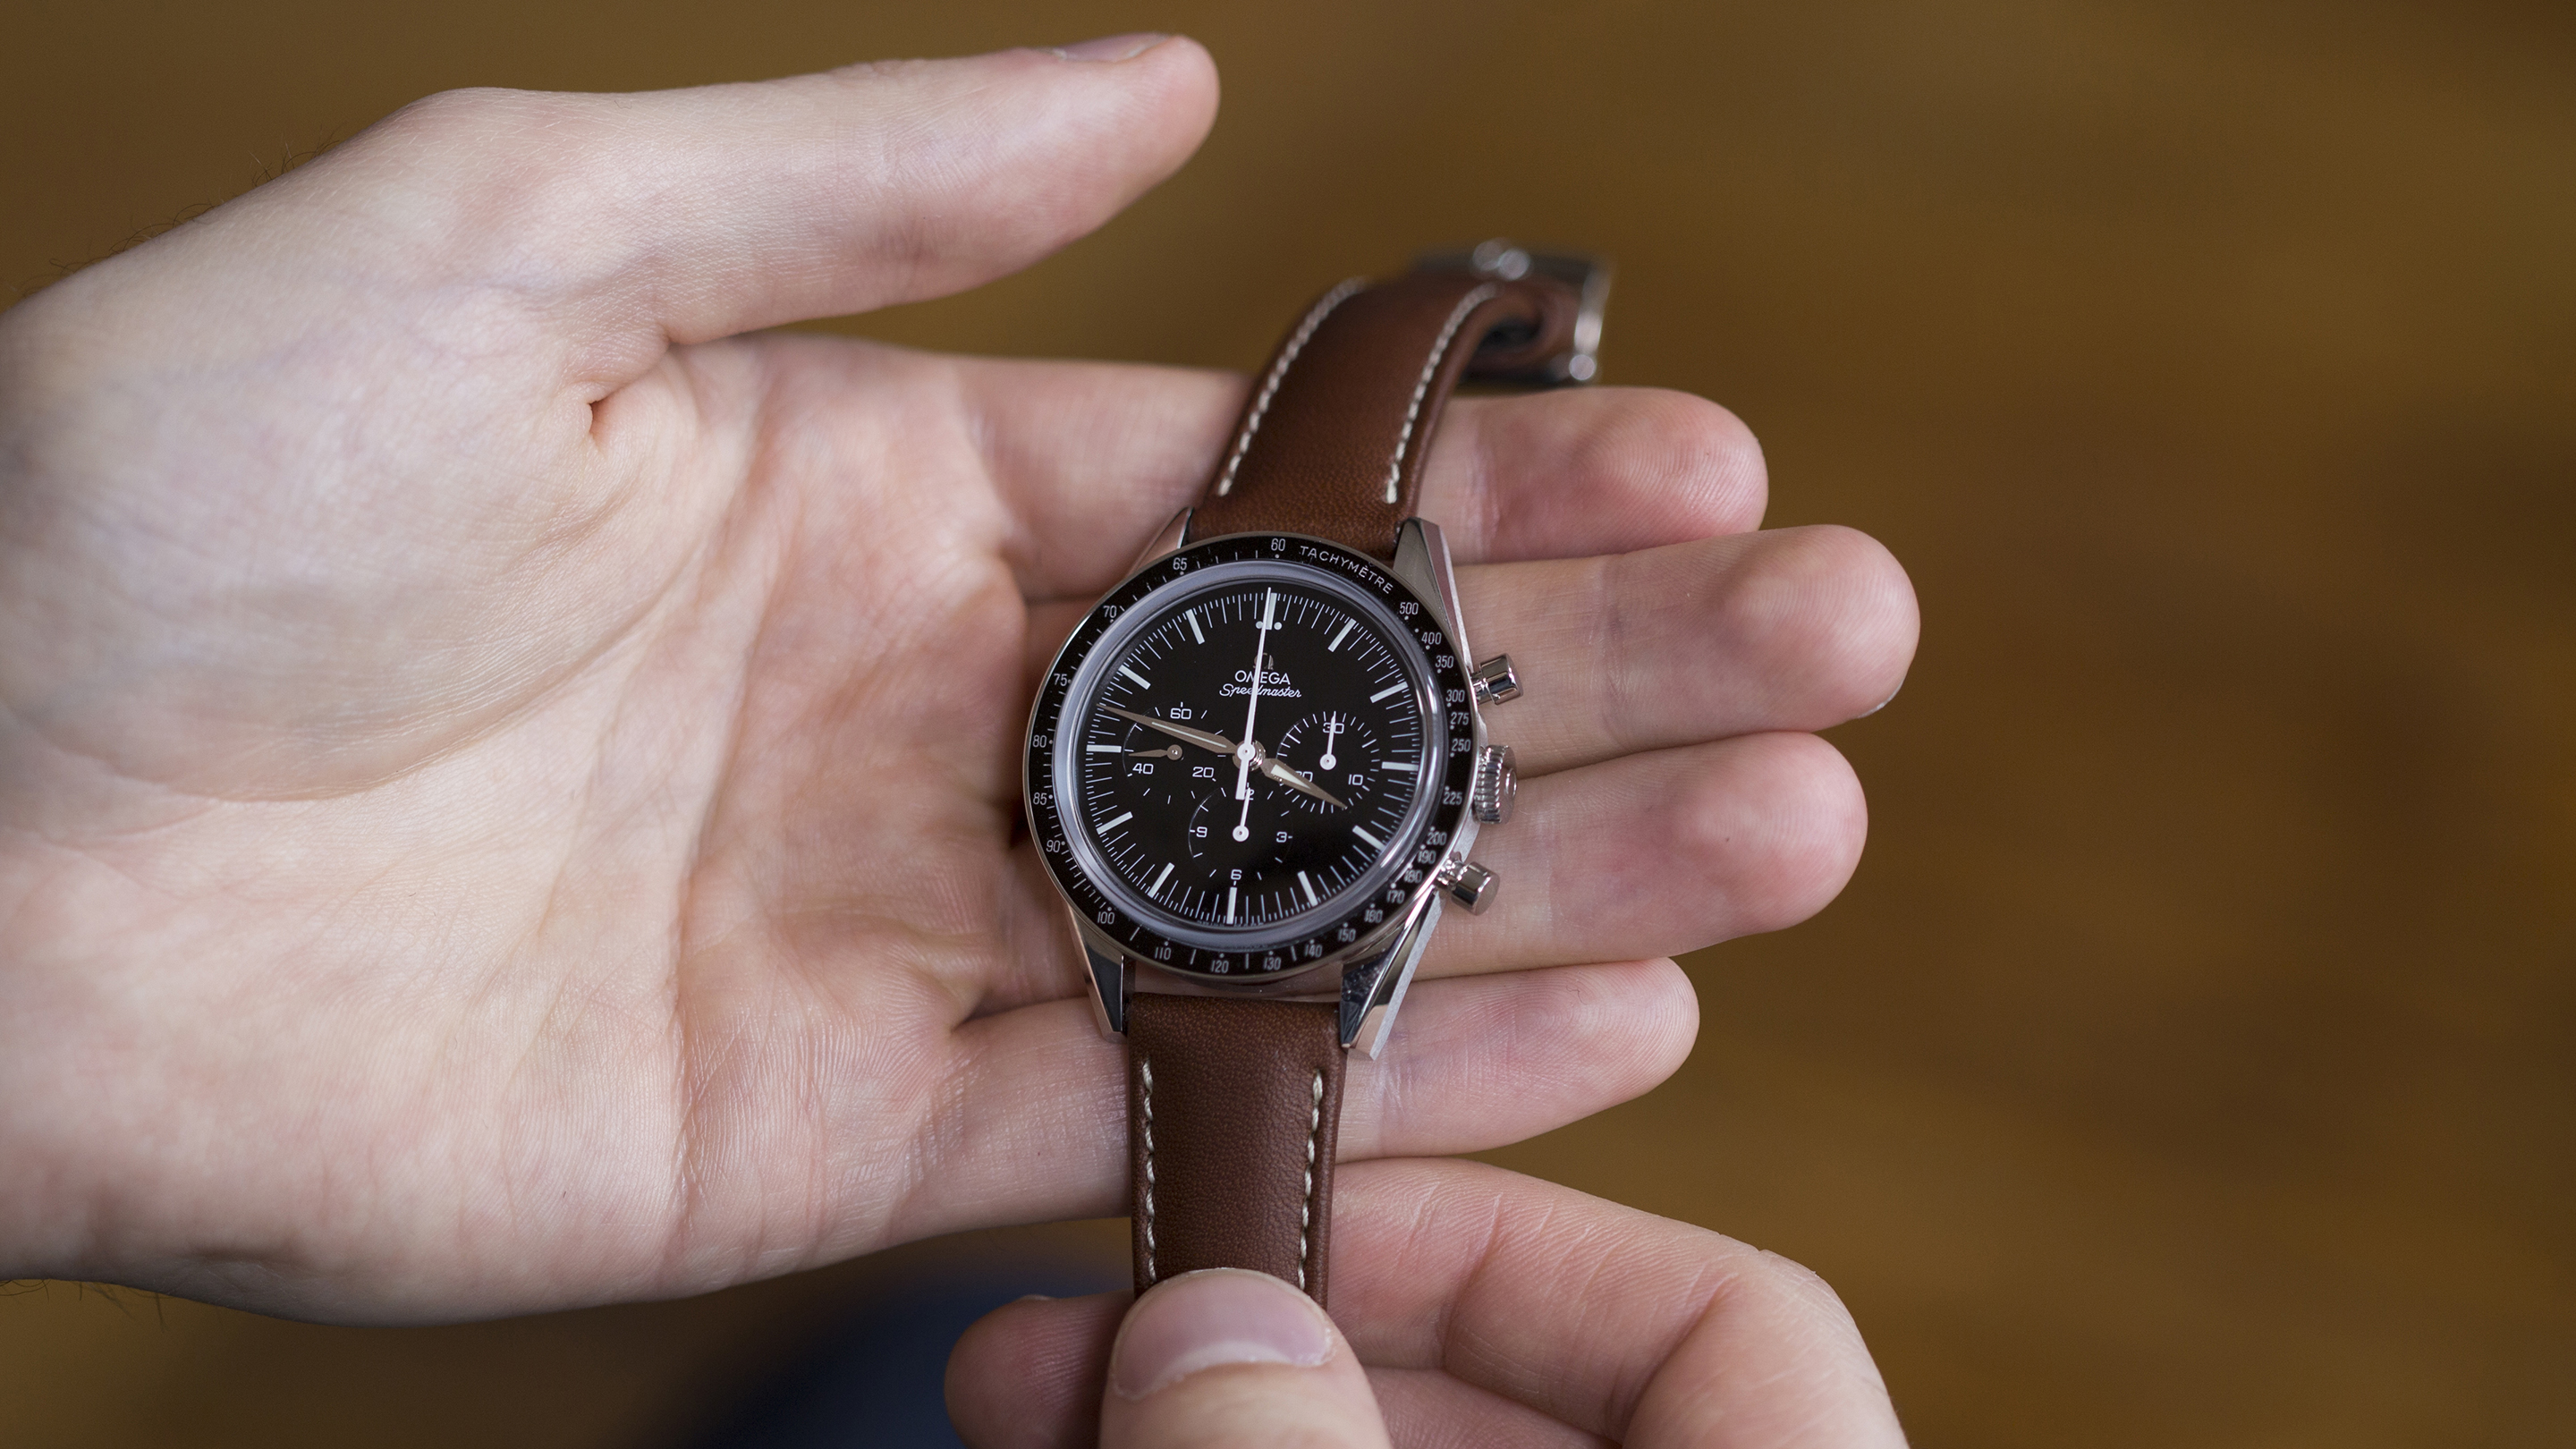 Omega Speedmaster 'First Omega In Space 